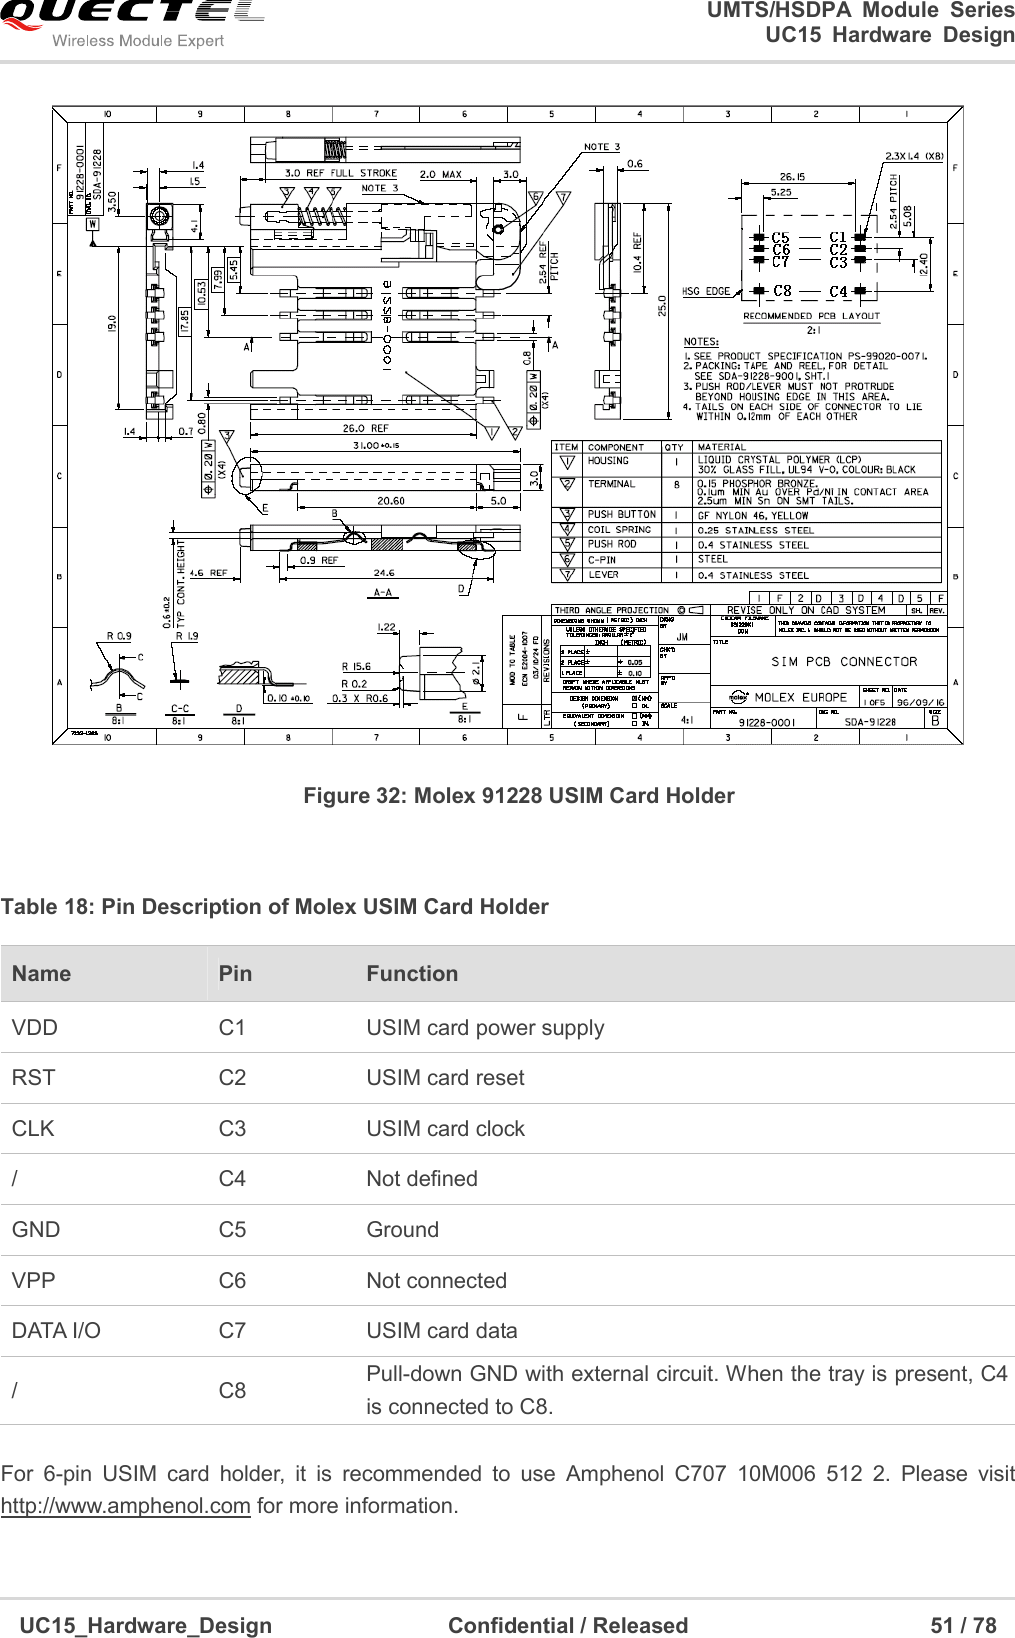                                                                        UMTS/HSDPA  Module  Series                                                                 UC15 Hardware Design  UC15_Hardware_Design                                Confidential / Released                                            51 / 78     Figure 32: Molex 91228 USIM Card Holder  Table 18: Pin Description of Molex USIM Card Holder  For  6-pin  USIM  card  holder,  it  is  recommended  to  use  Amphenol  C707  10M006  512  2.  Please  visit http://www.amphenol.com for more information.         Name  Pin  Function VDD  C1  USIM card power supply RST  C2  USIM card reset CLK  C3  USIM card clock /  C4  Not defined GND  C5  Ground VPP  C6  Not connected DATA I/O  C7  USIM card data /  C8  Pull-down GND with external circuit. When the tray is present, C4 is connected to C8. 